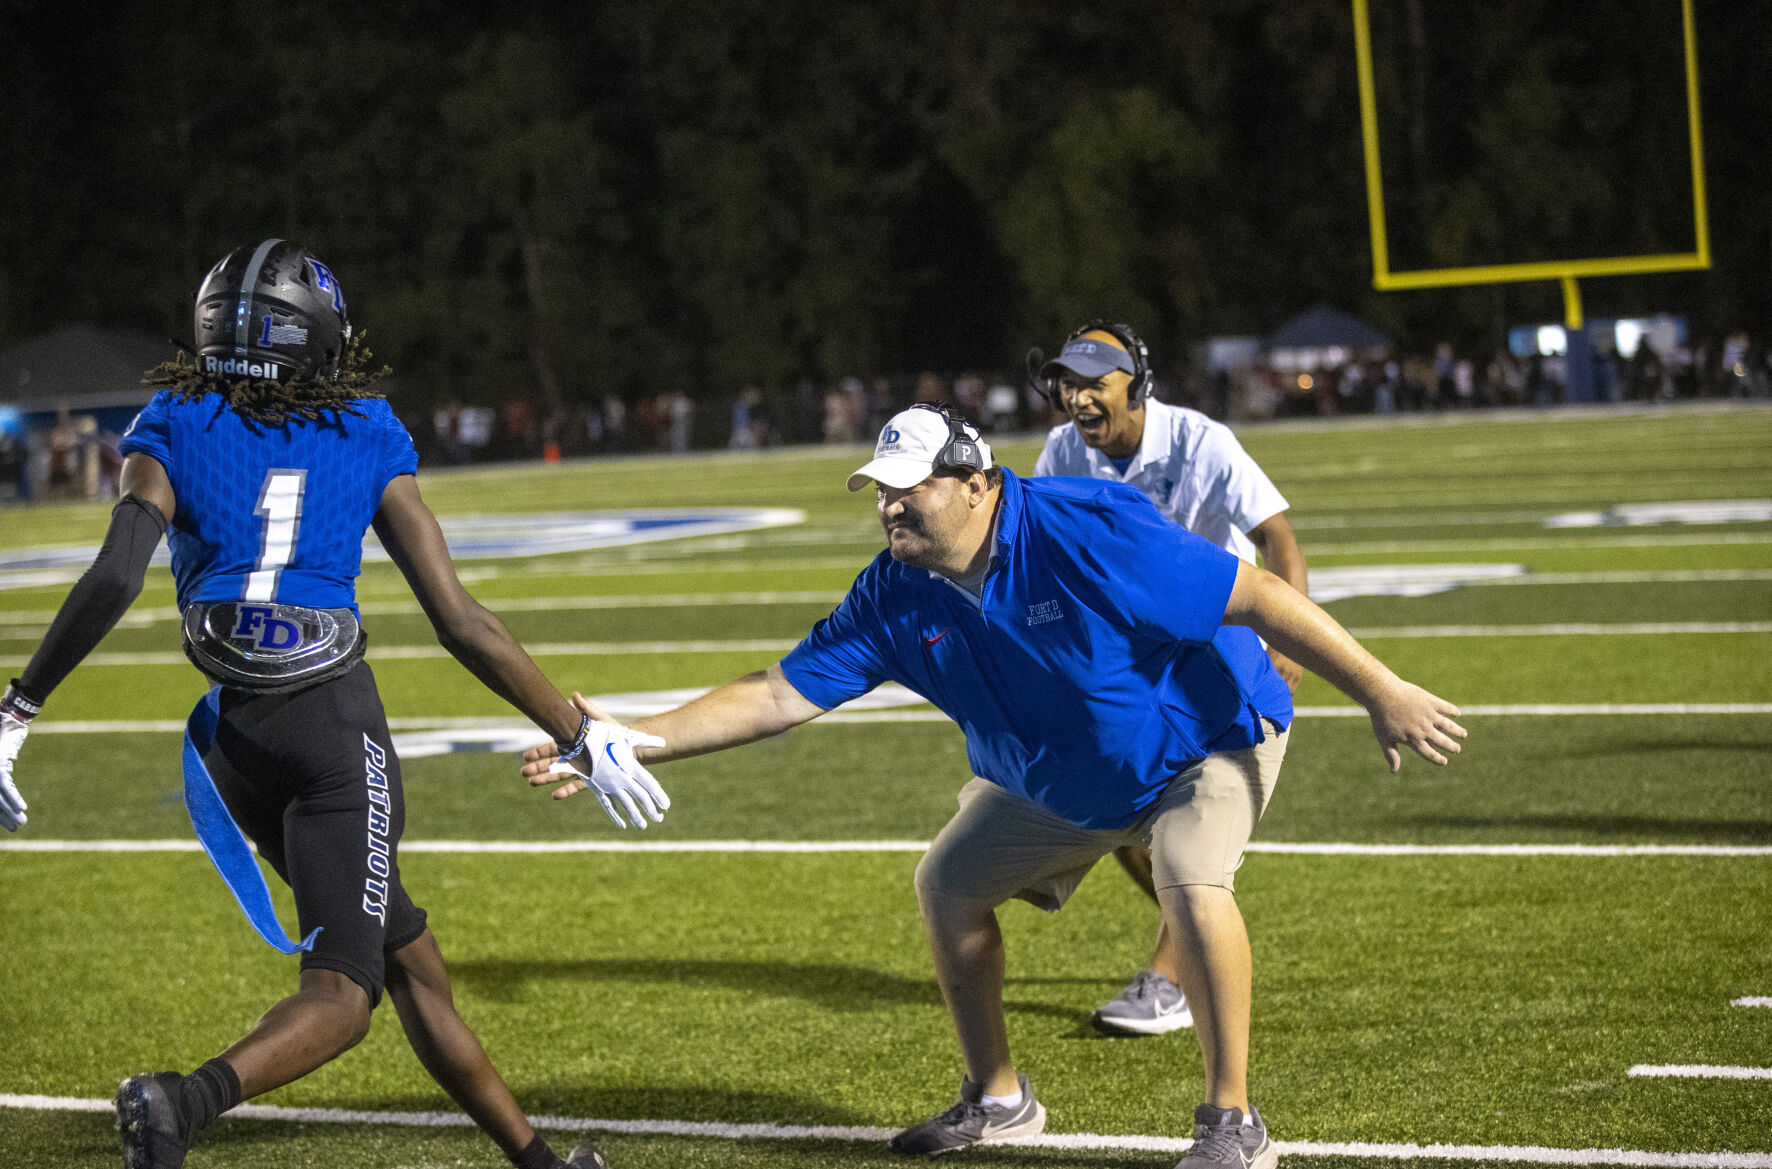 Fort Dorchester High School Accepting Applications for Head Football Coaching Position